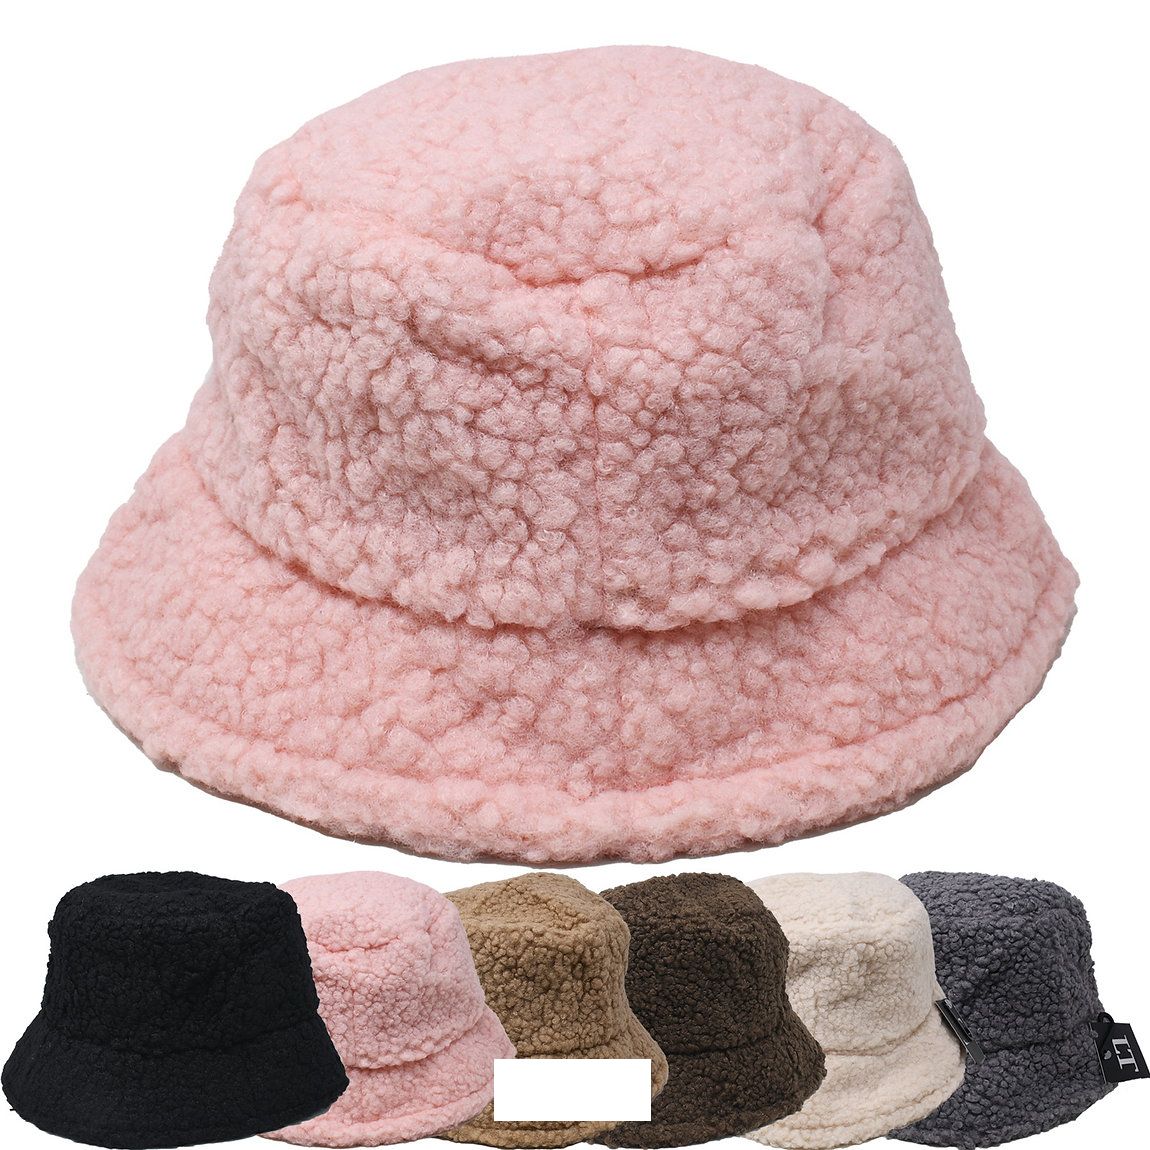 12 Pieces of Women's Winter Sherpa Fur Bucket Hat Style Knitted Hats With Fleece Lining In Assorted Colors